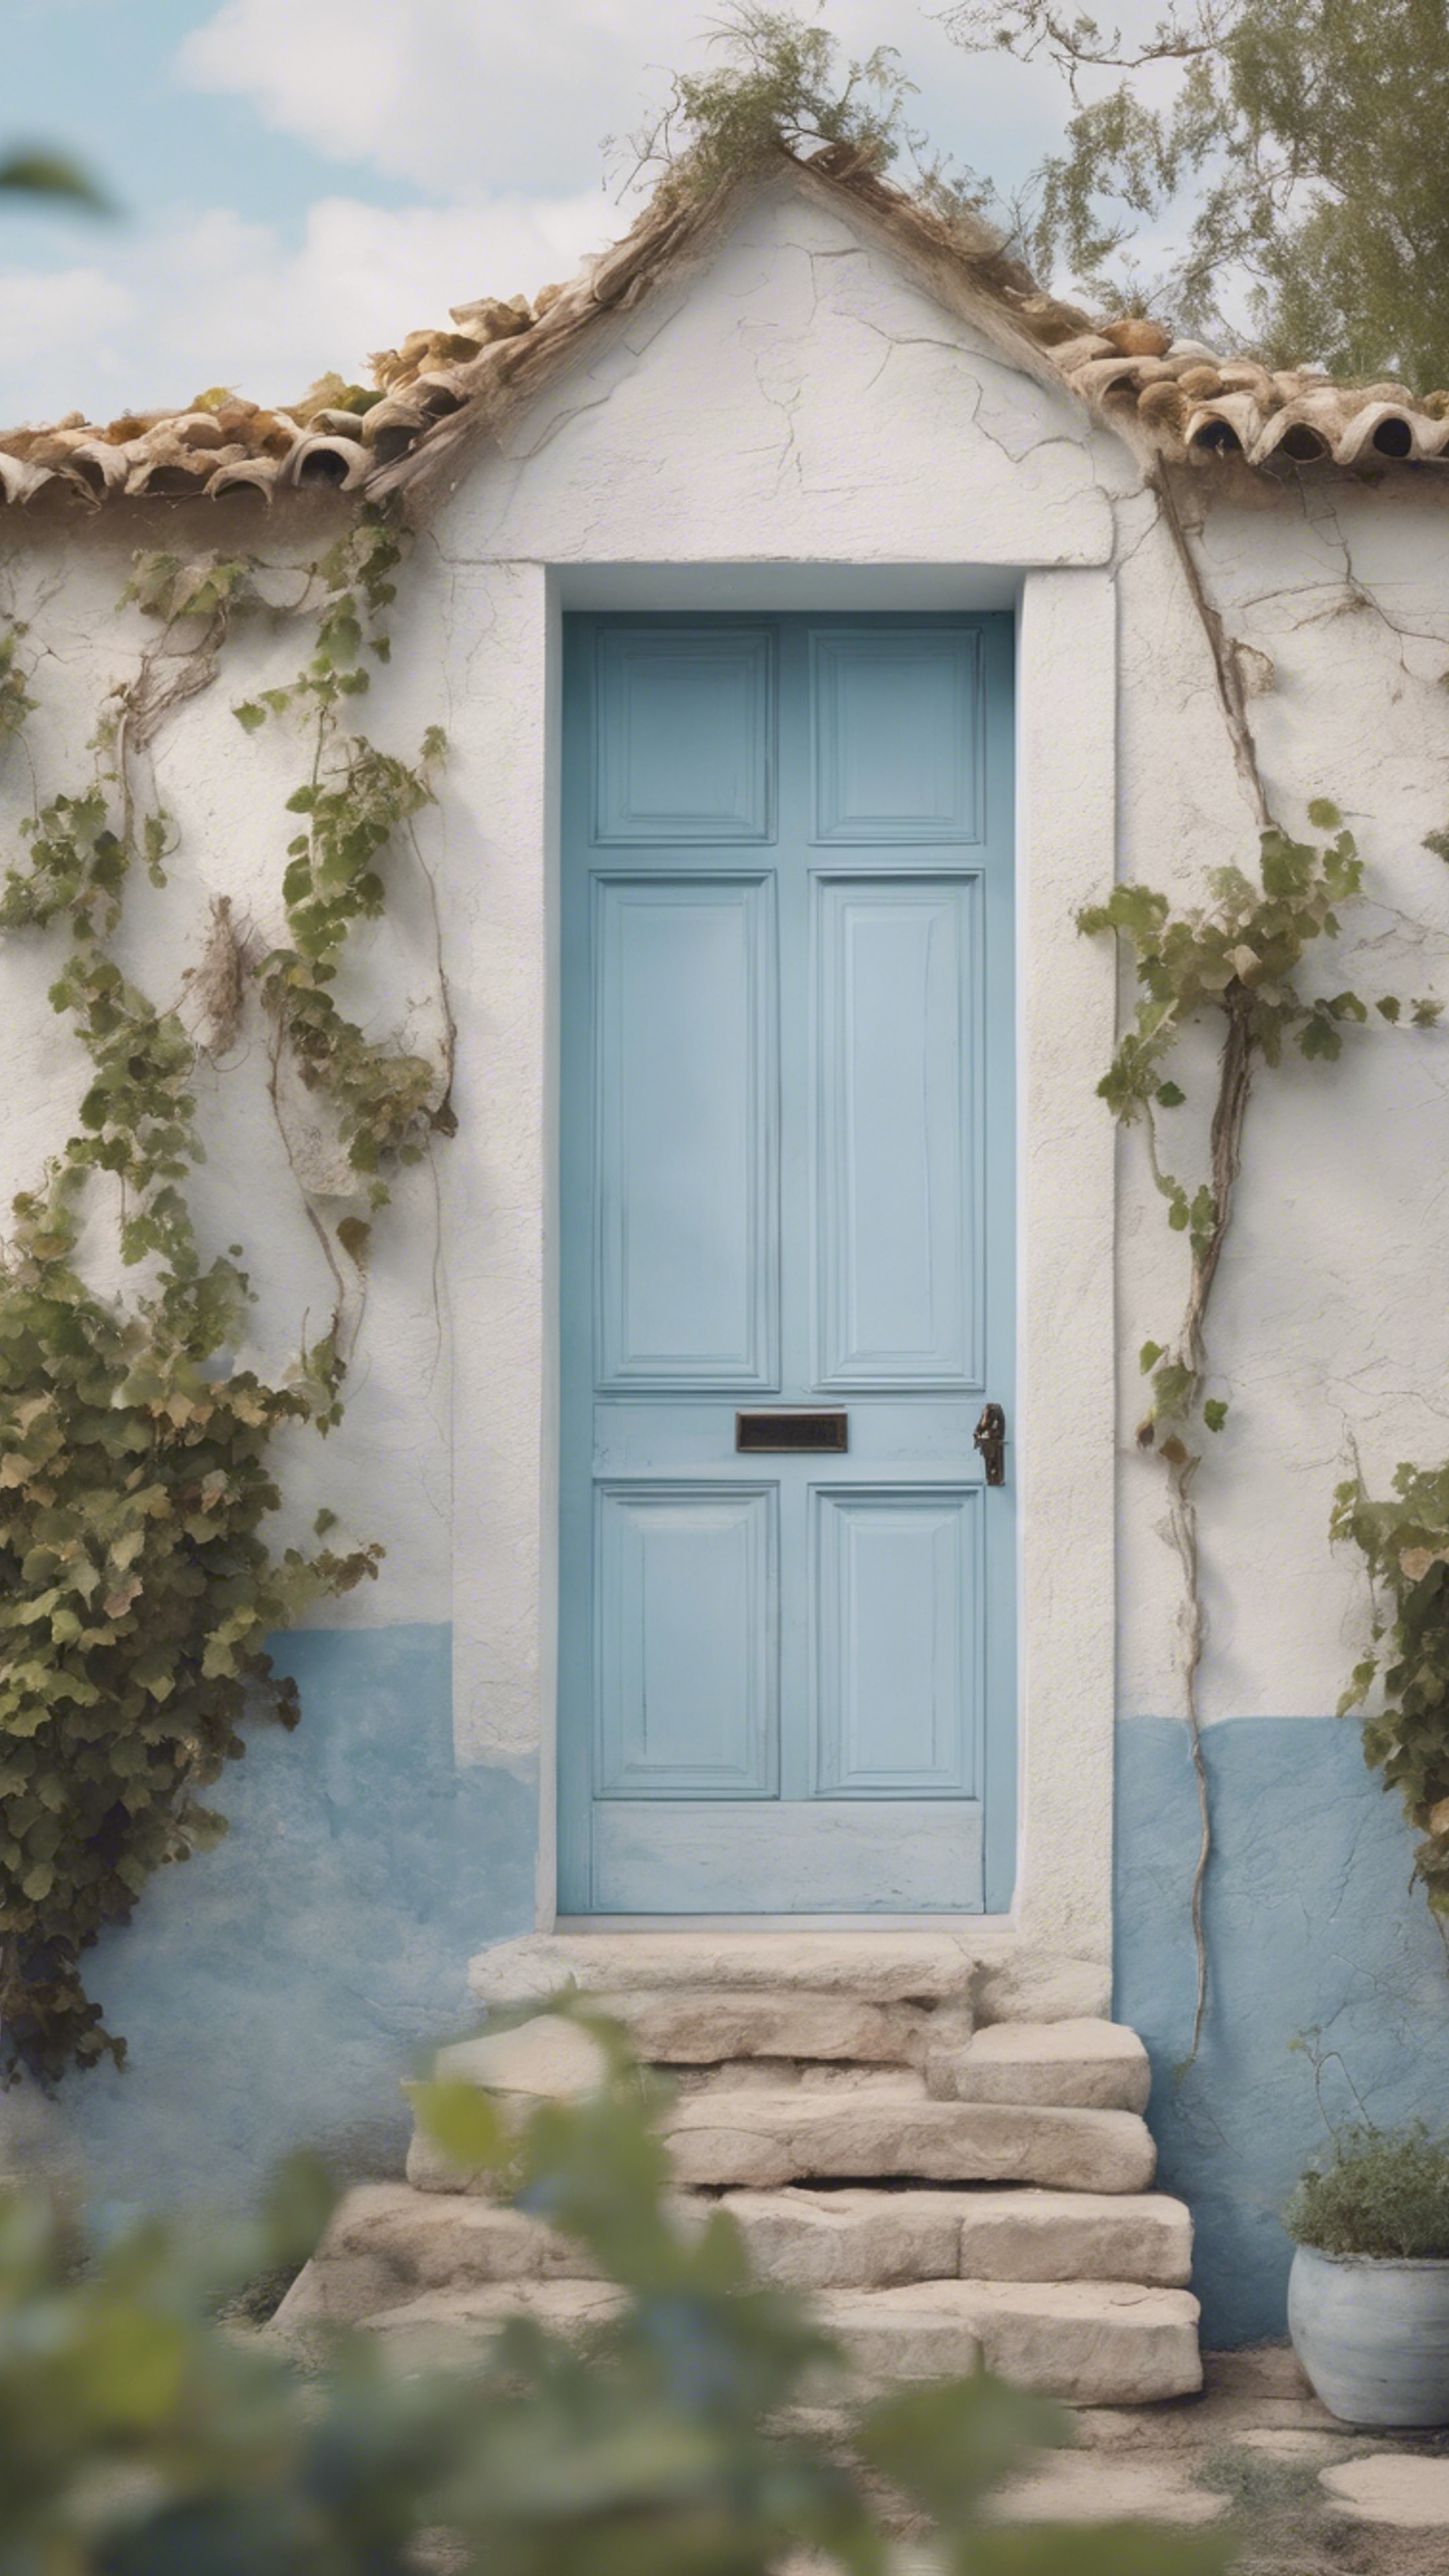 A pastel blue painted door on a rustic white house, a vineyard in the background. Ფონი[5cba61123f91494ab86f]